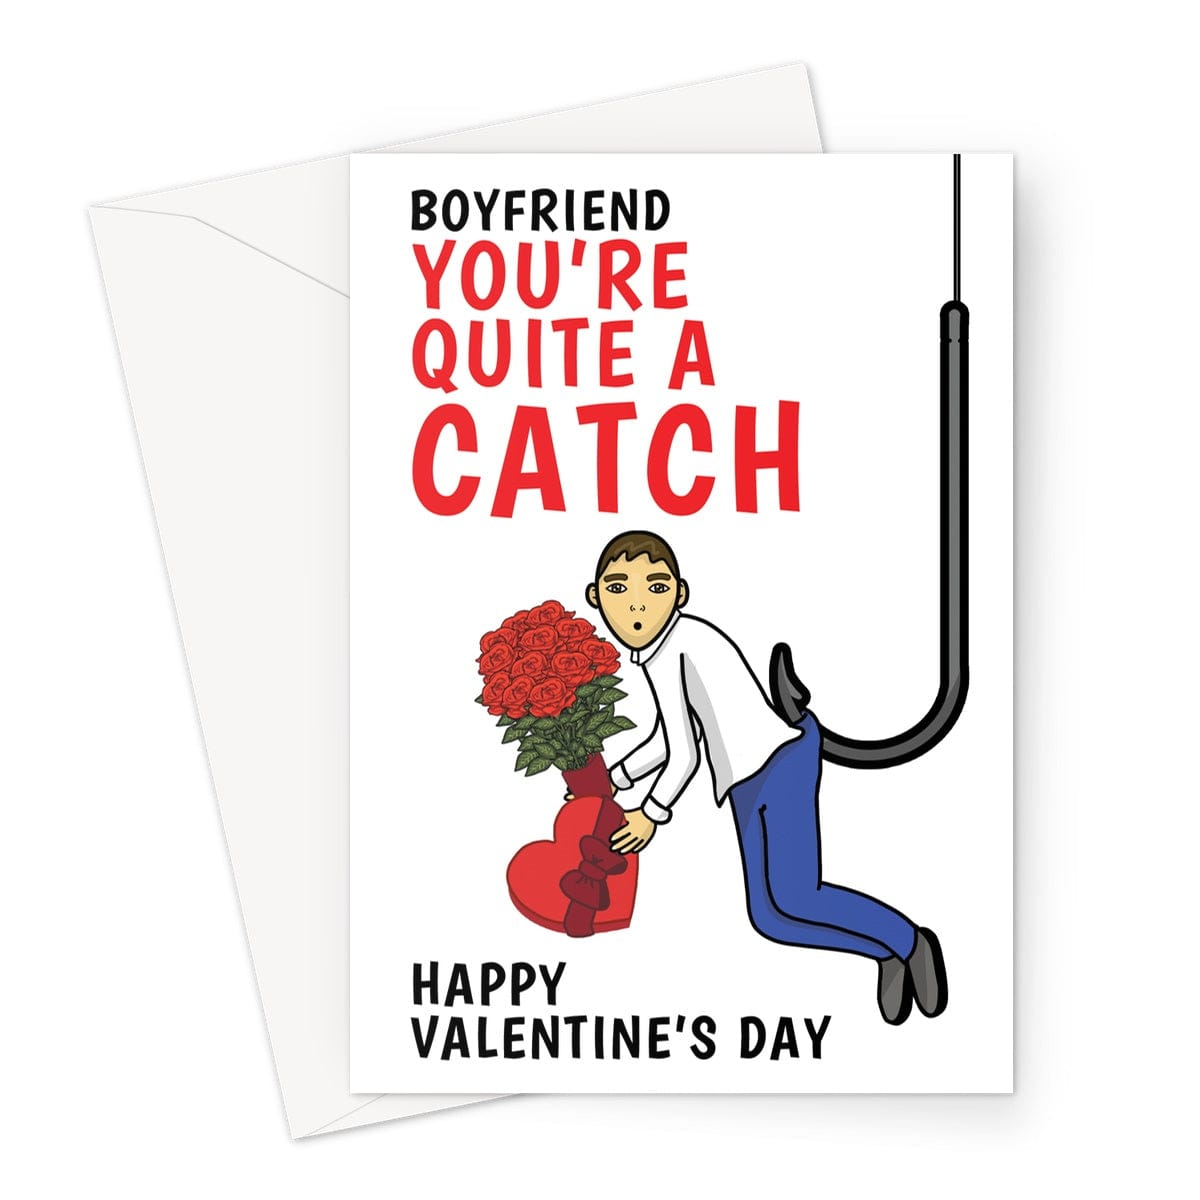 Happy Valentine's Day Card For Boyfriend - Funny Quite A Catch